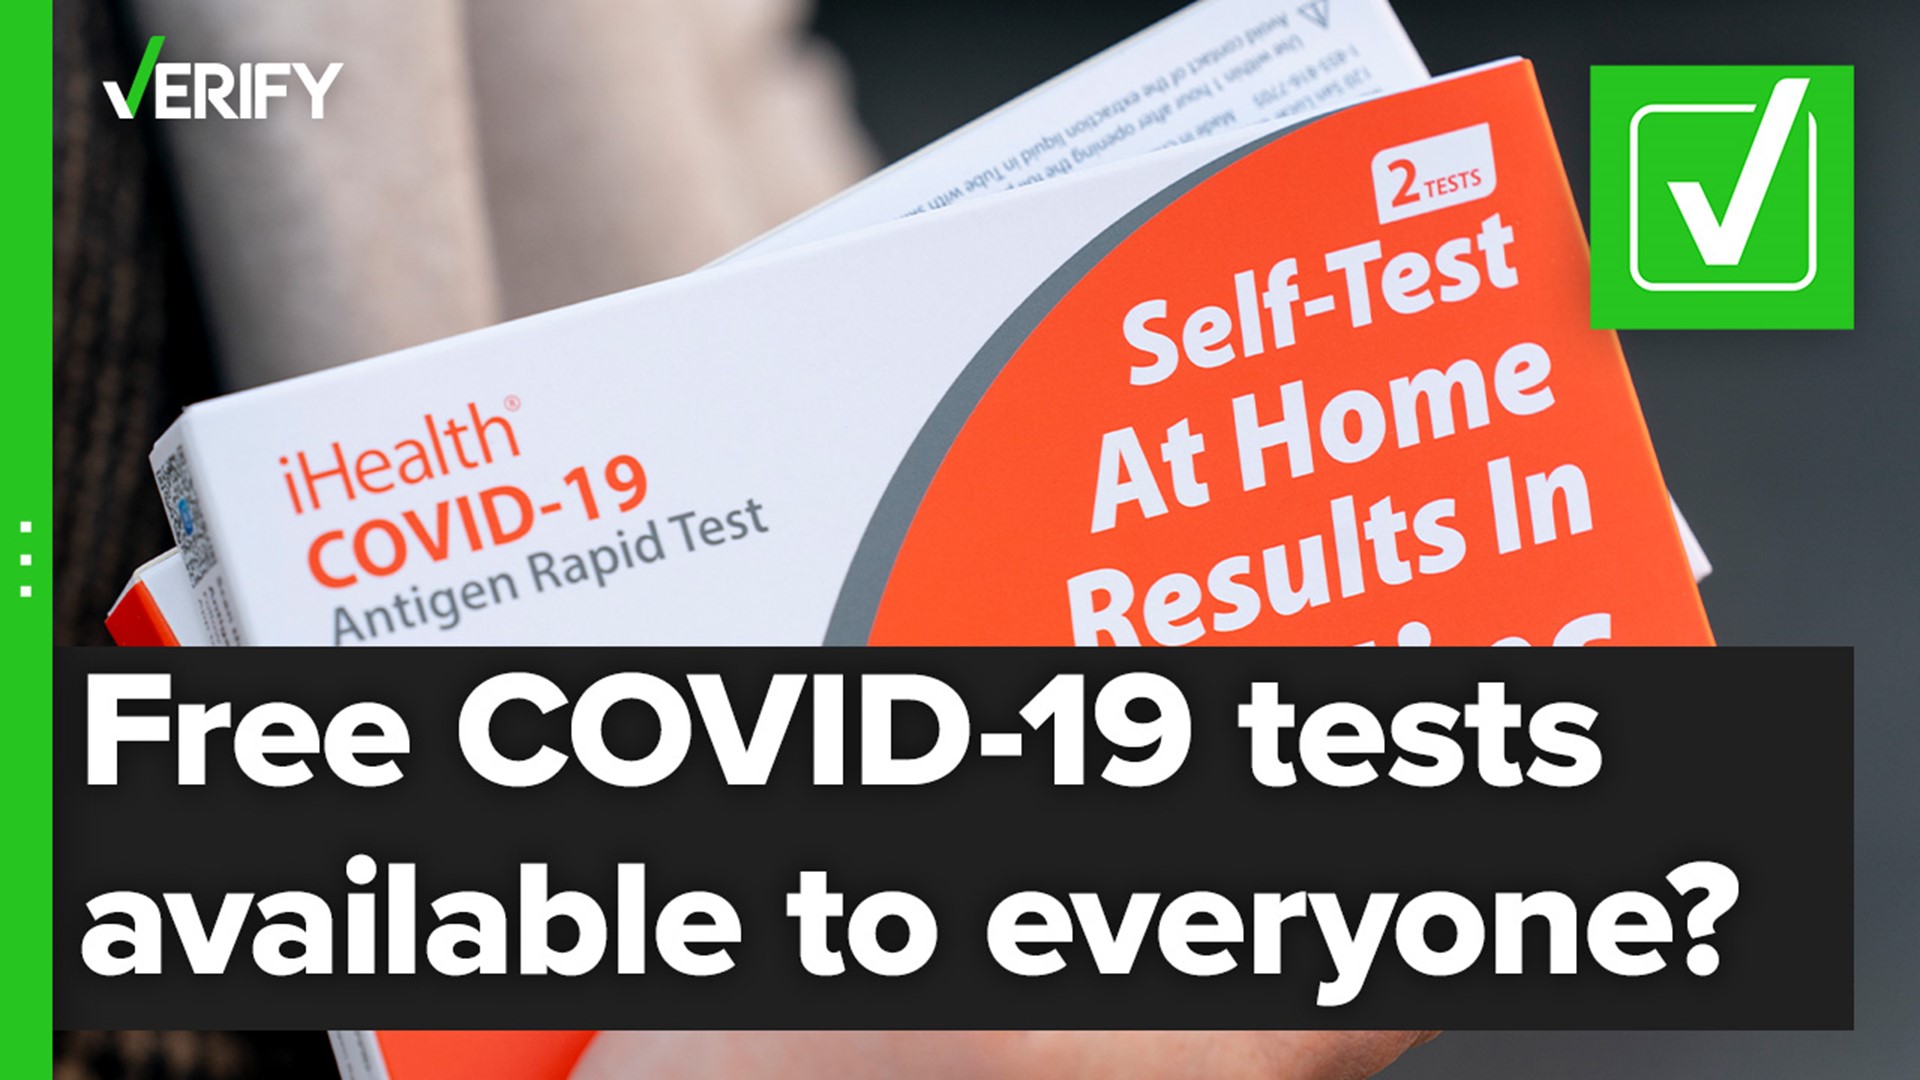 The federal government’s free at-home COVID-19 tests are available to every residential address in the United States, regardless of immigration status.